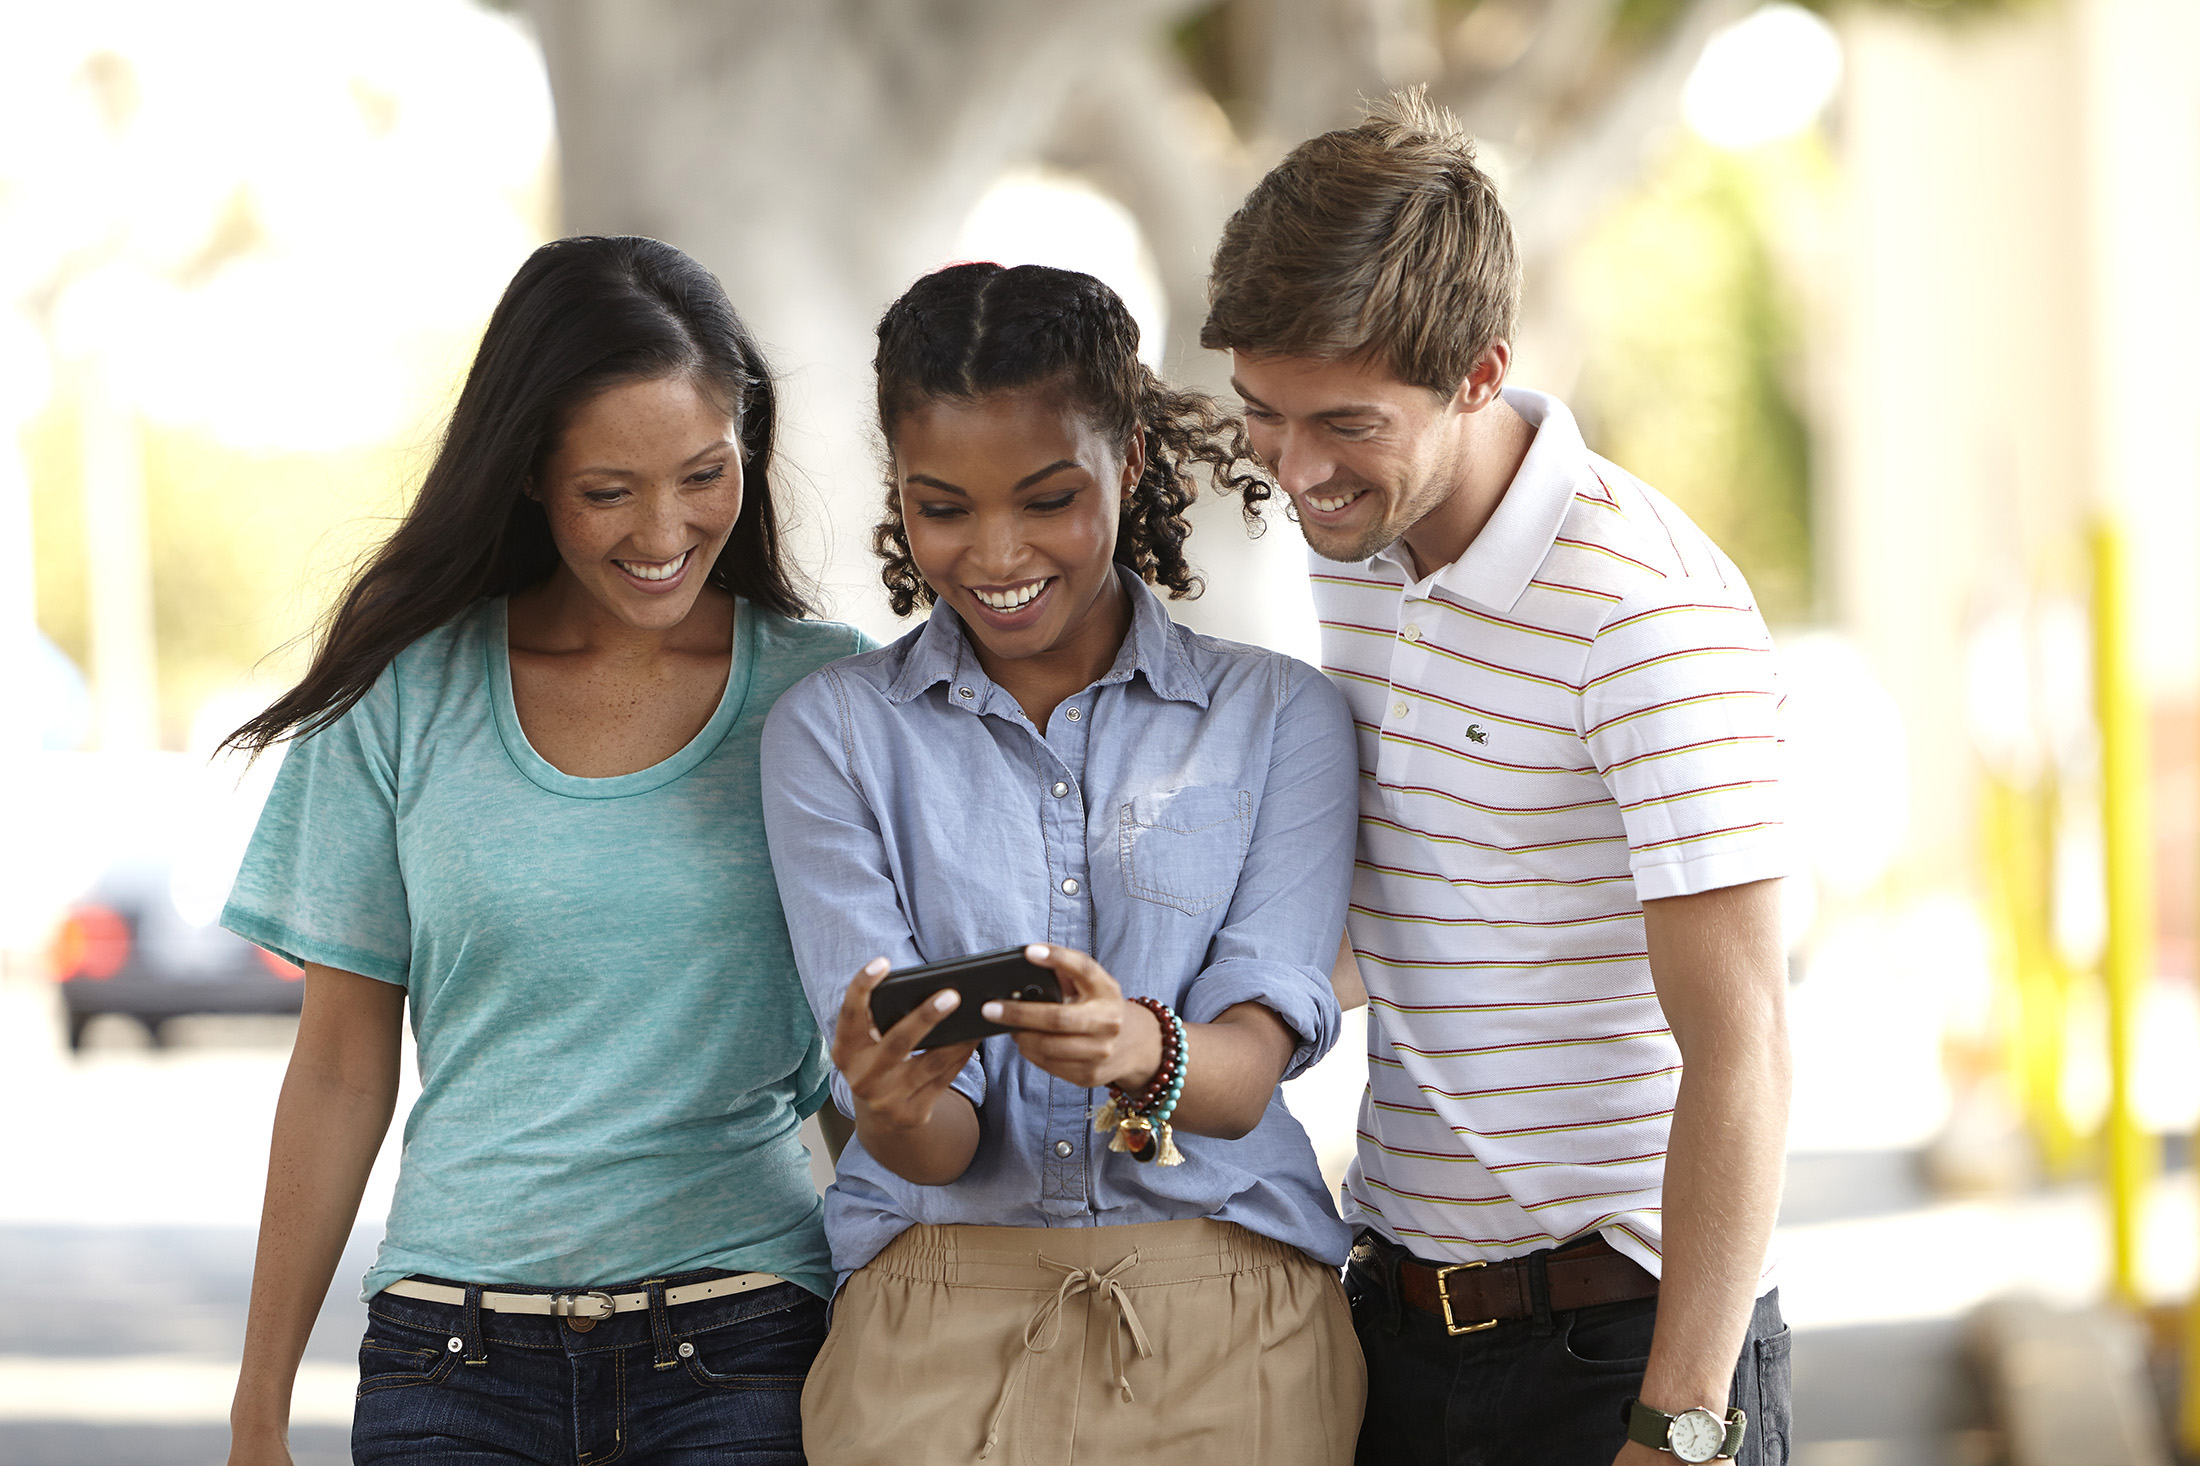 With the BYOD Starter Kit, consumers can cut their wireless bills and enjoy greater control.